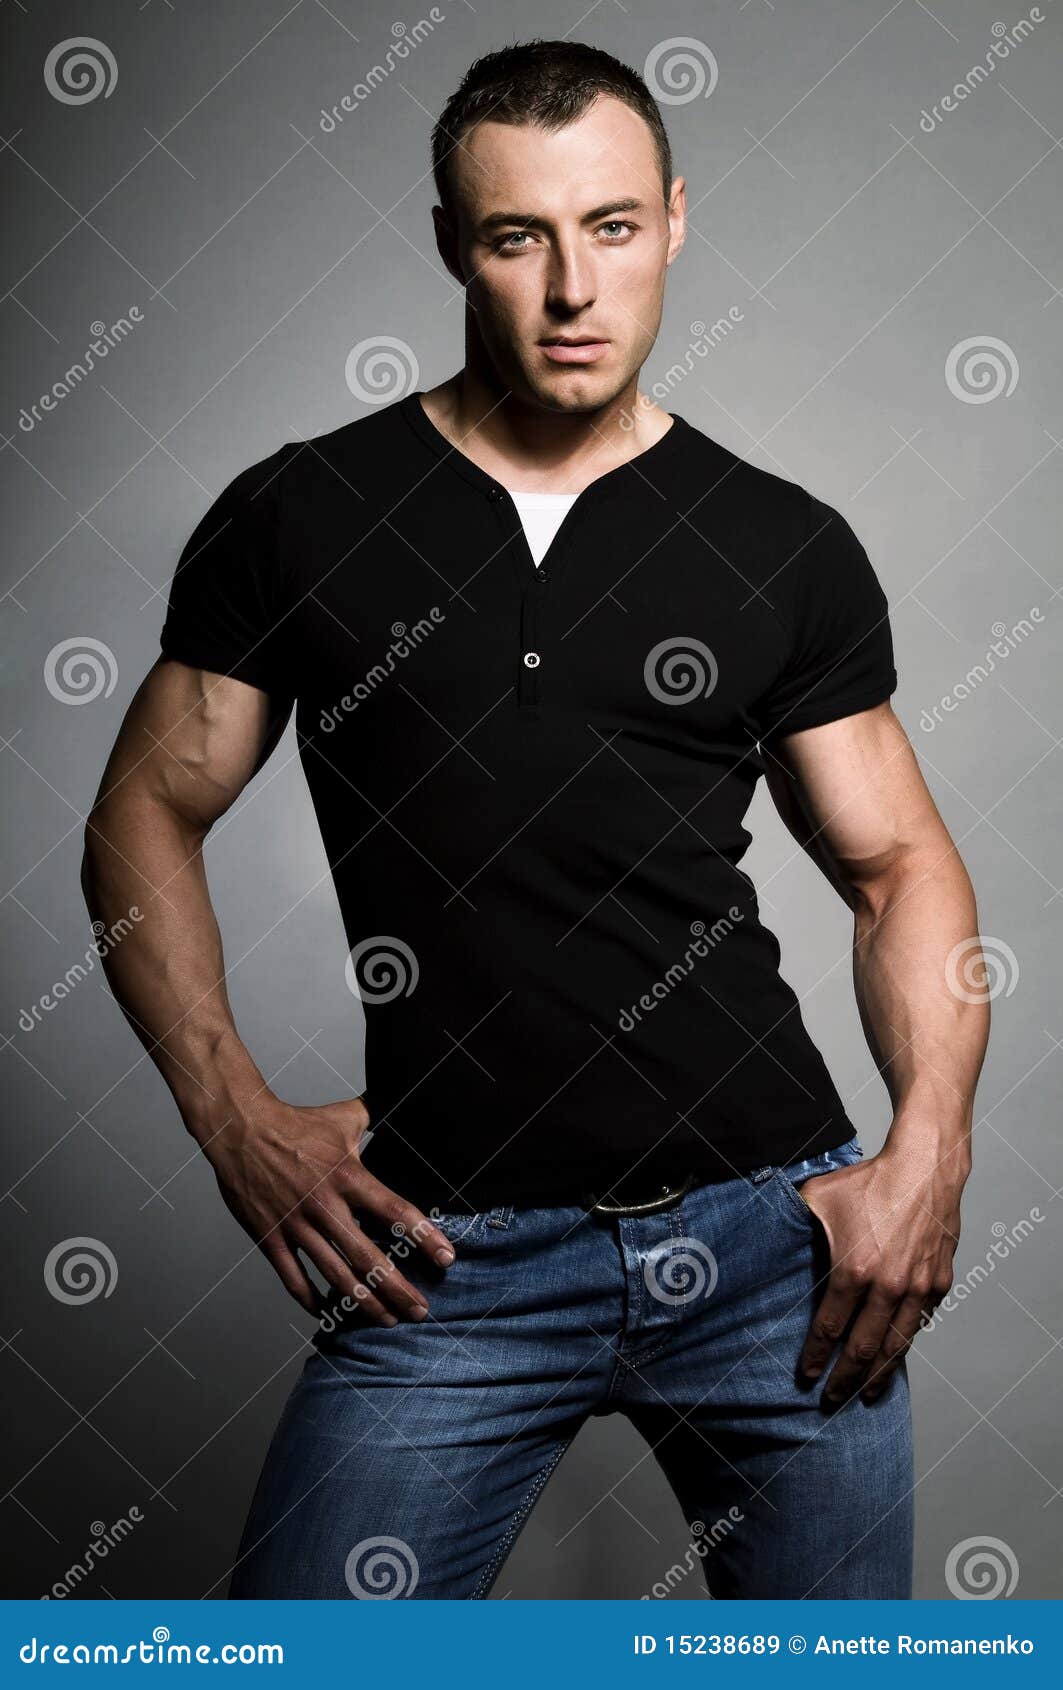 The male portrait. stock image. Image of power, muscular - 15238689